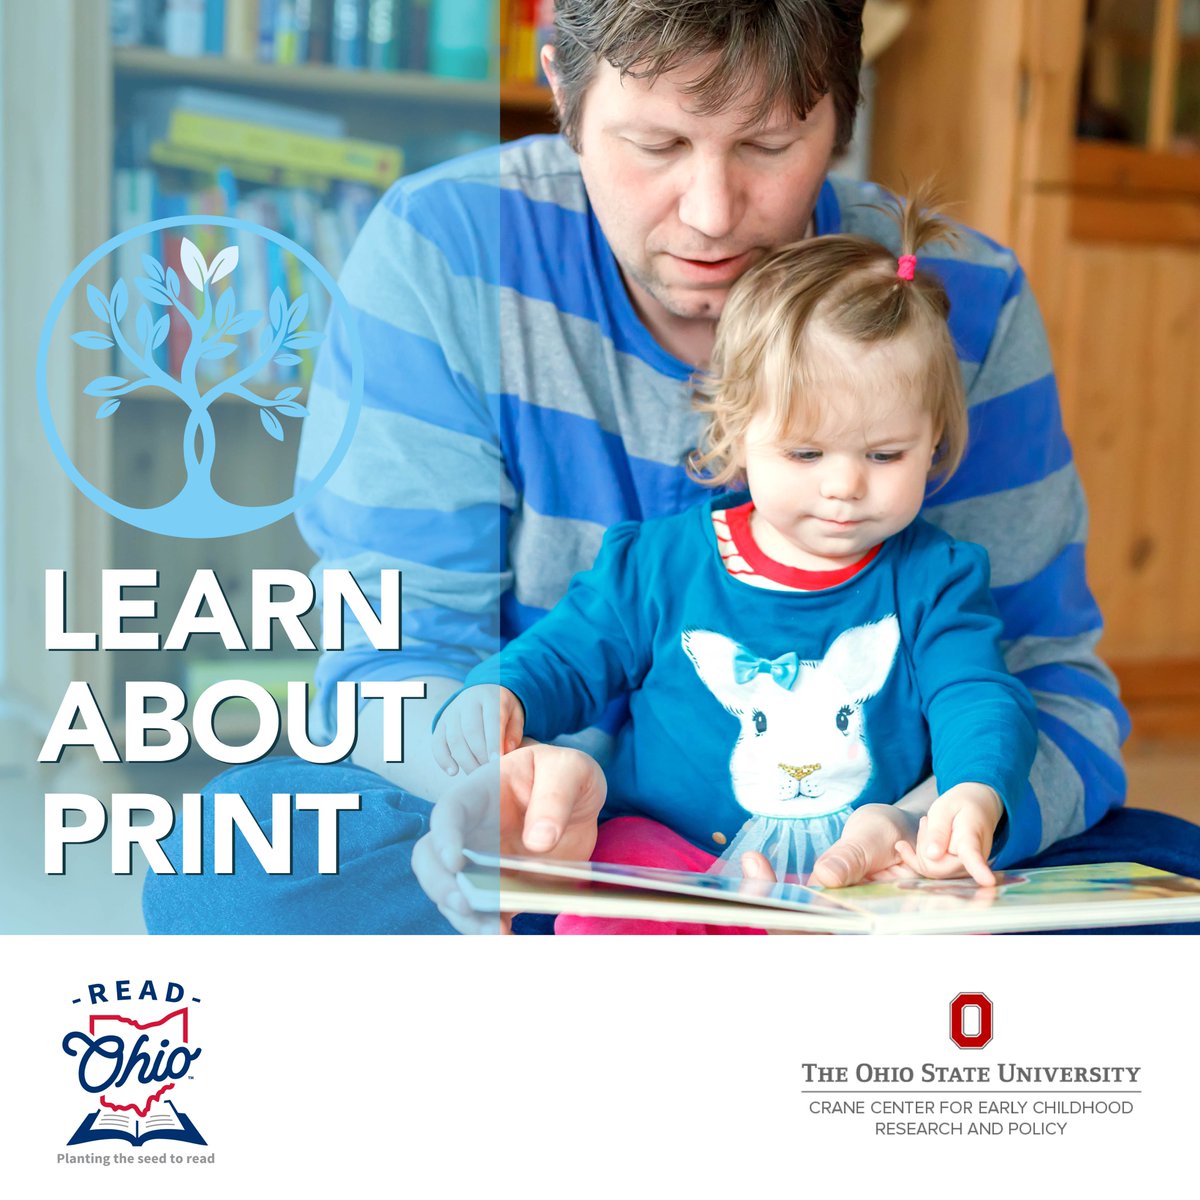 Explore print features, like spaces between words and periods at the end of sentences. This can help your child learn about print and boost their reading and writing skills! #PrintFeatures

Want more tips? Visit go.osu.edu/RTGT

#ReadTogetherGrowTogether @OHEducation